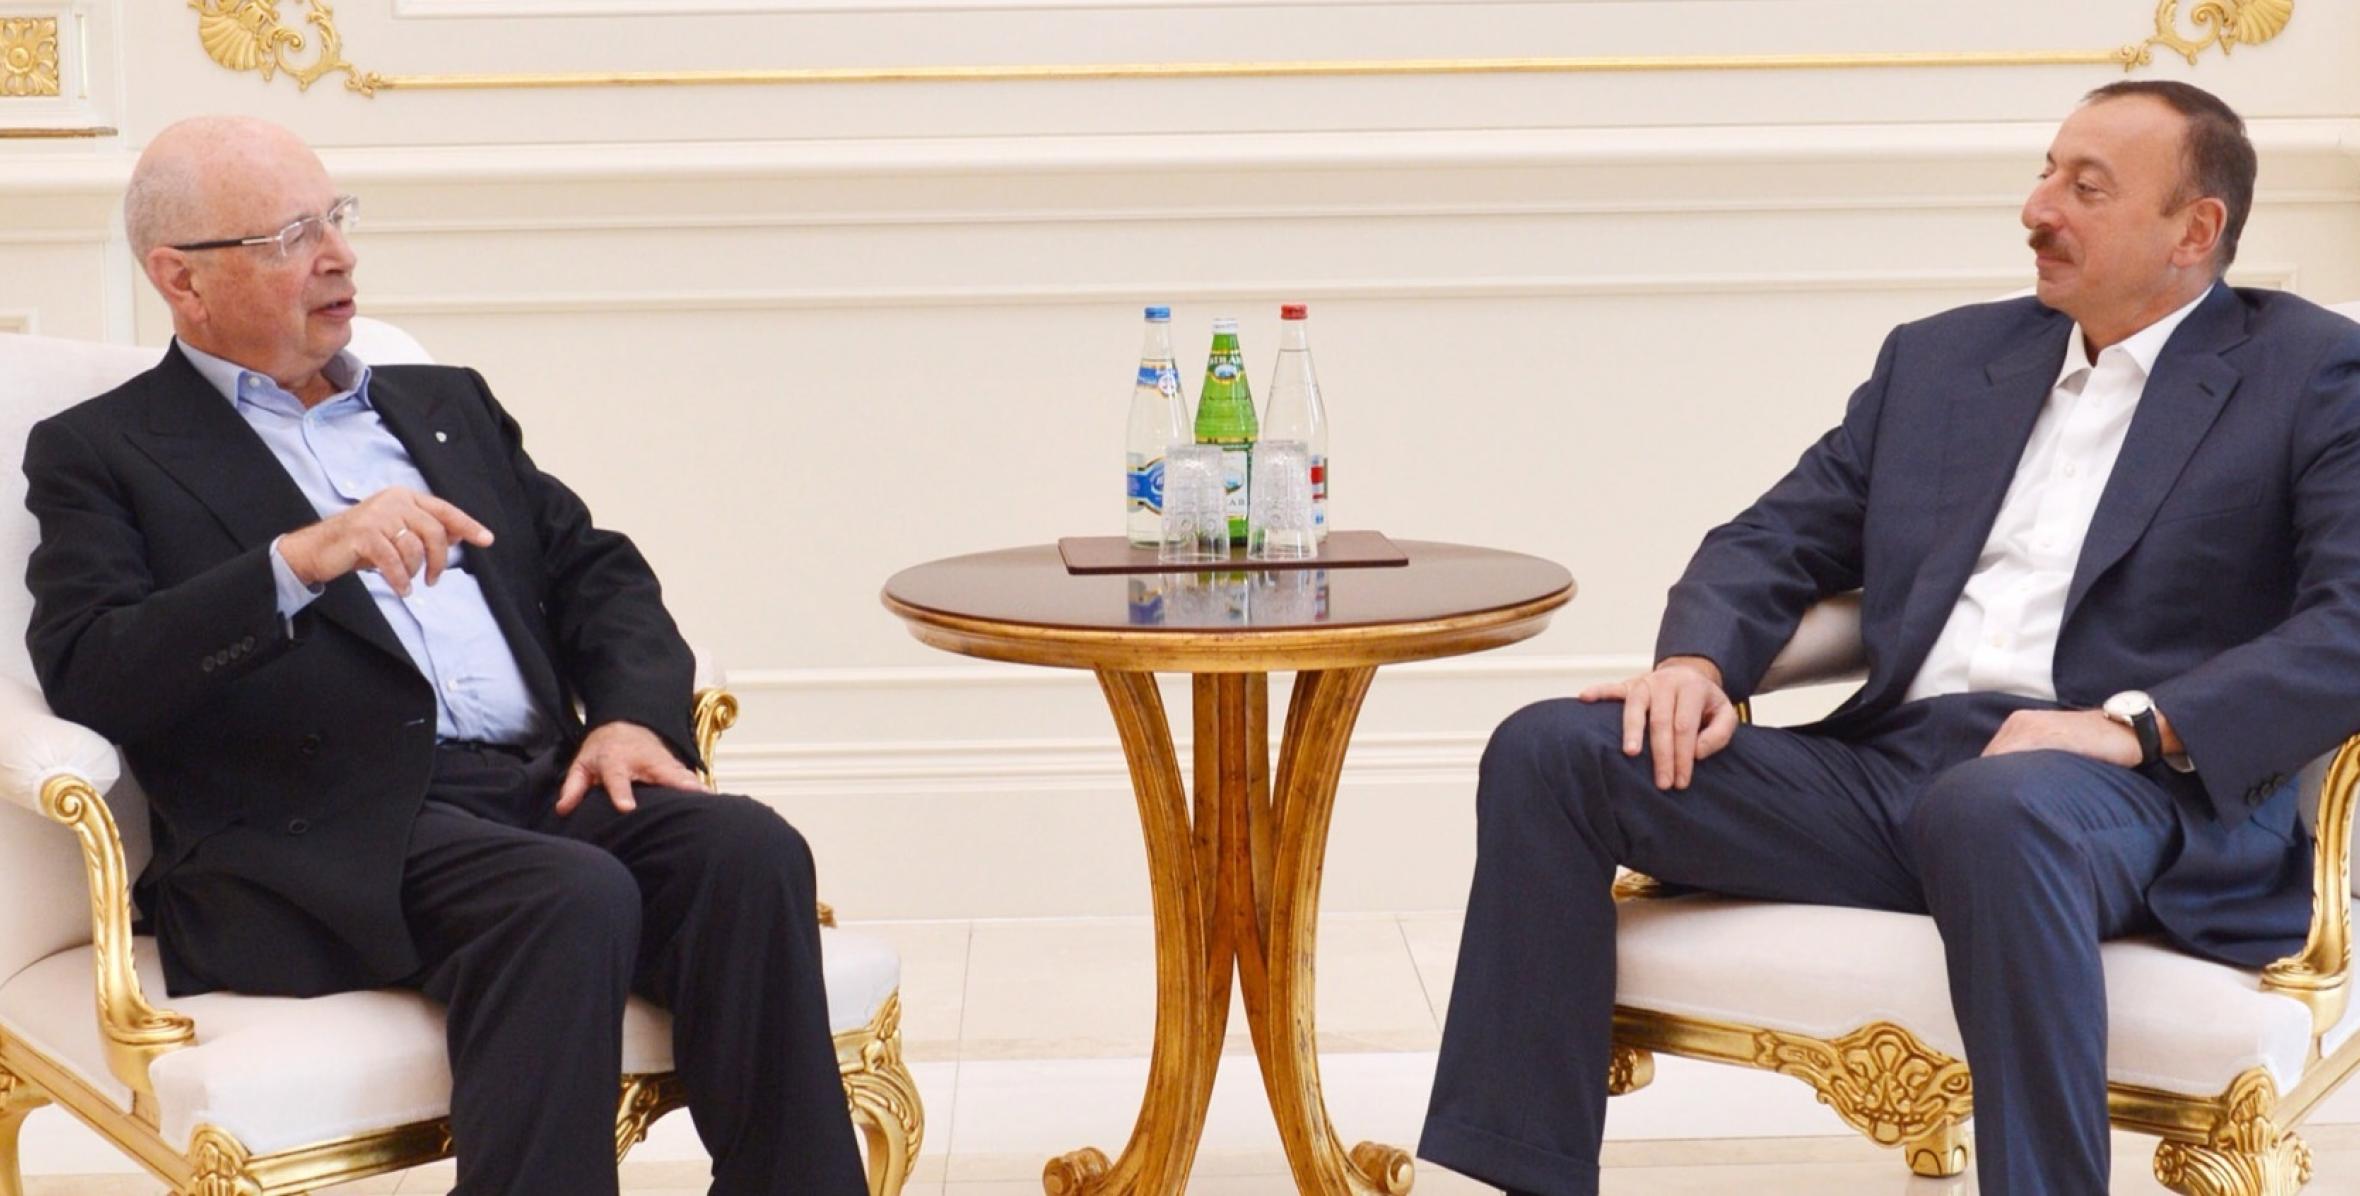 Ilham Aliyev received the founder and executive chairman of the Davos Economic Forum, Klaus Schwab